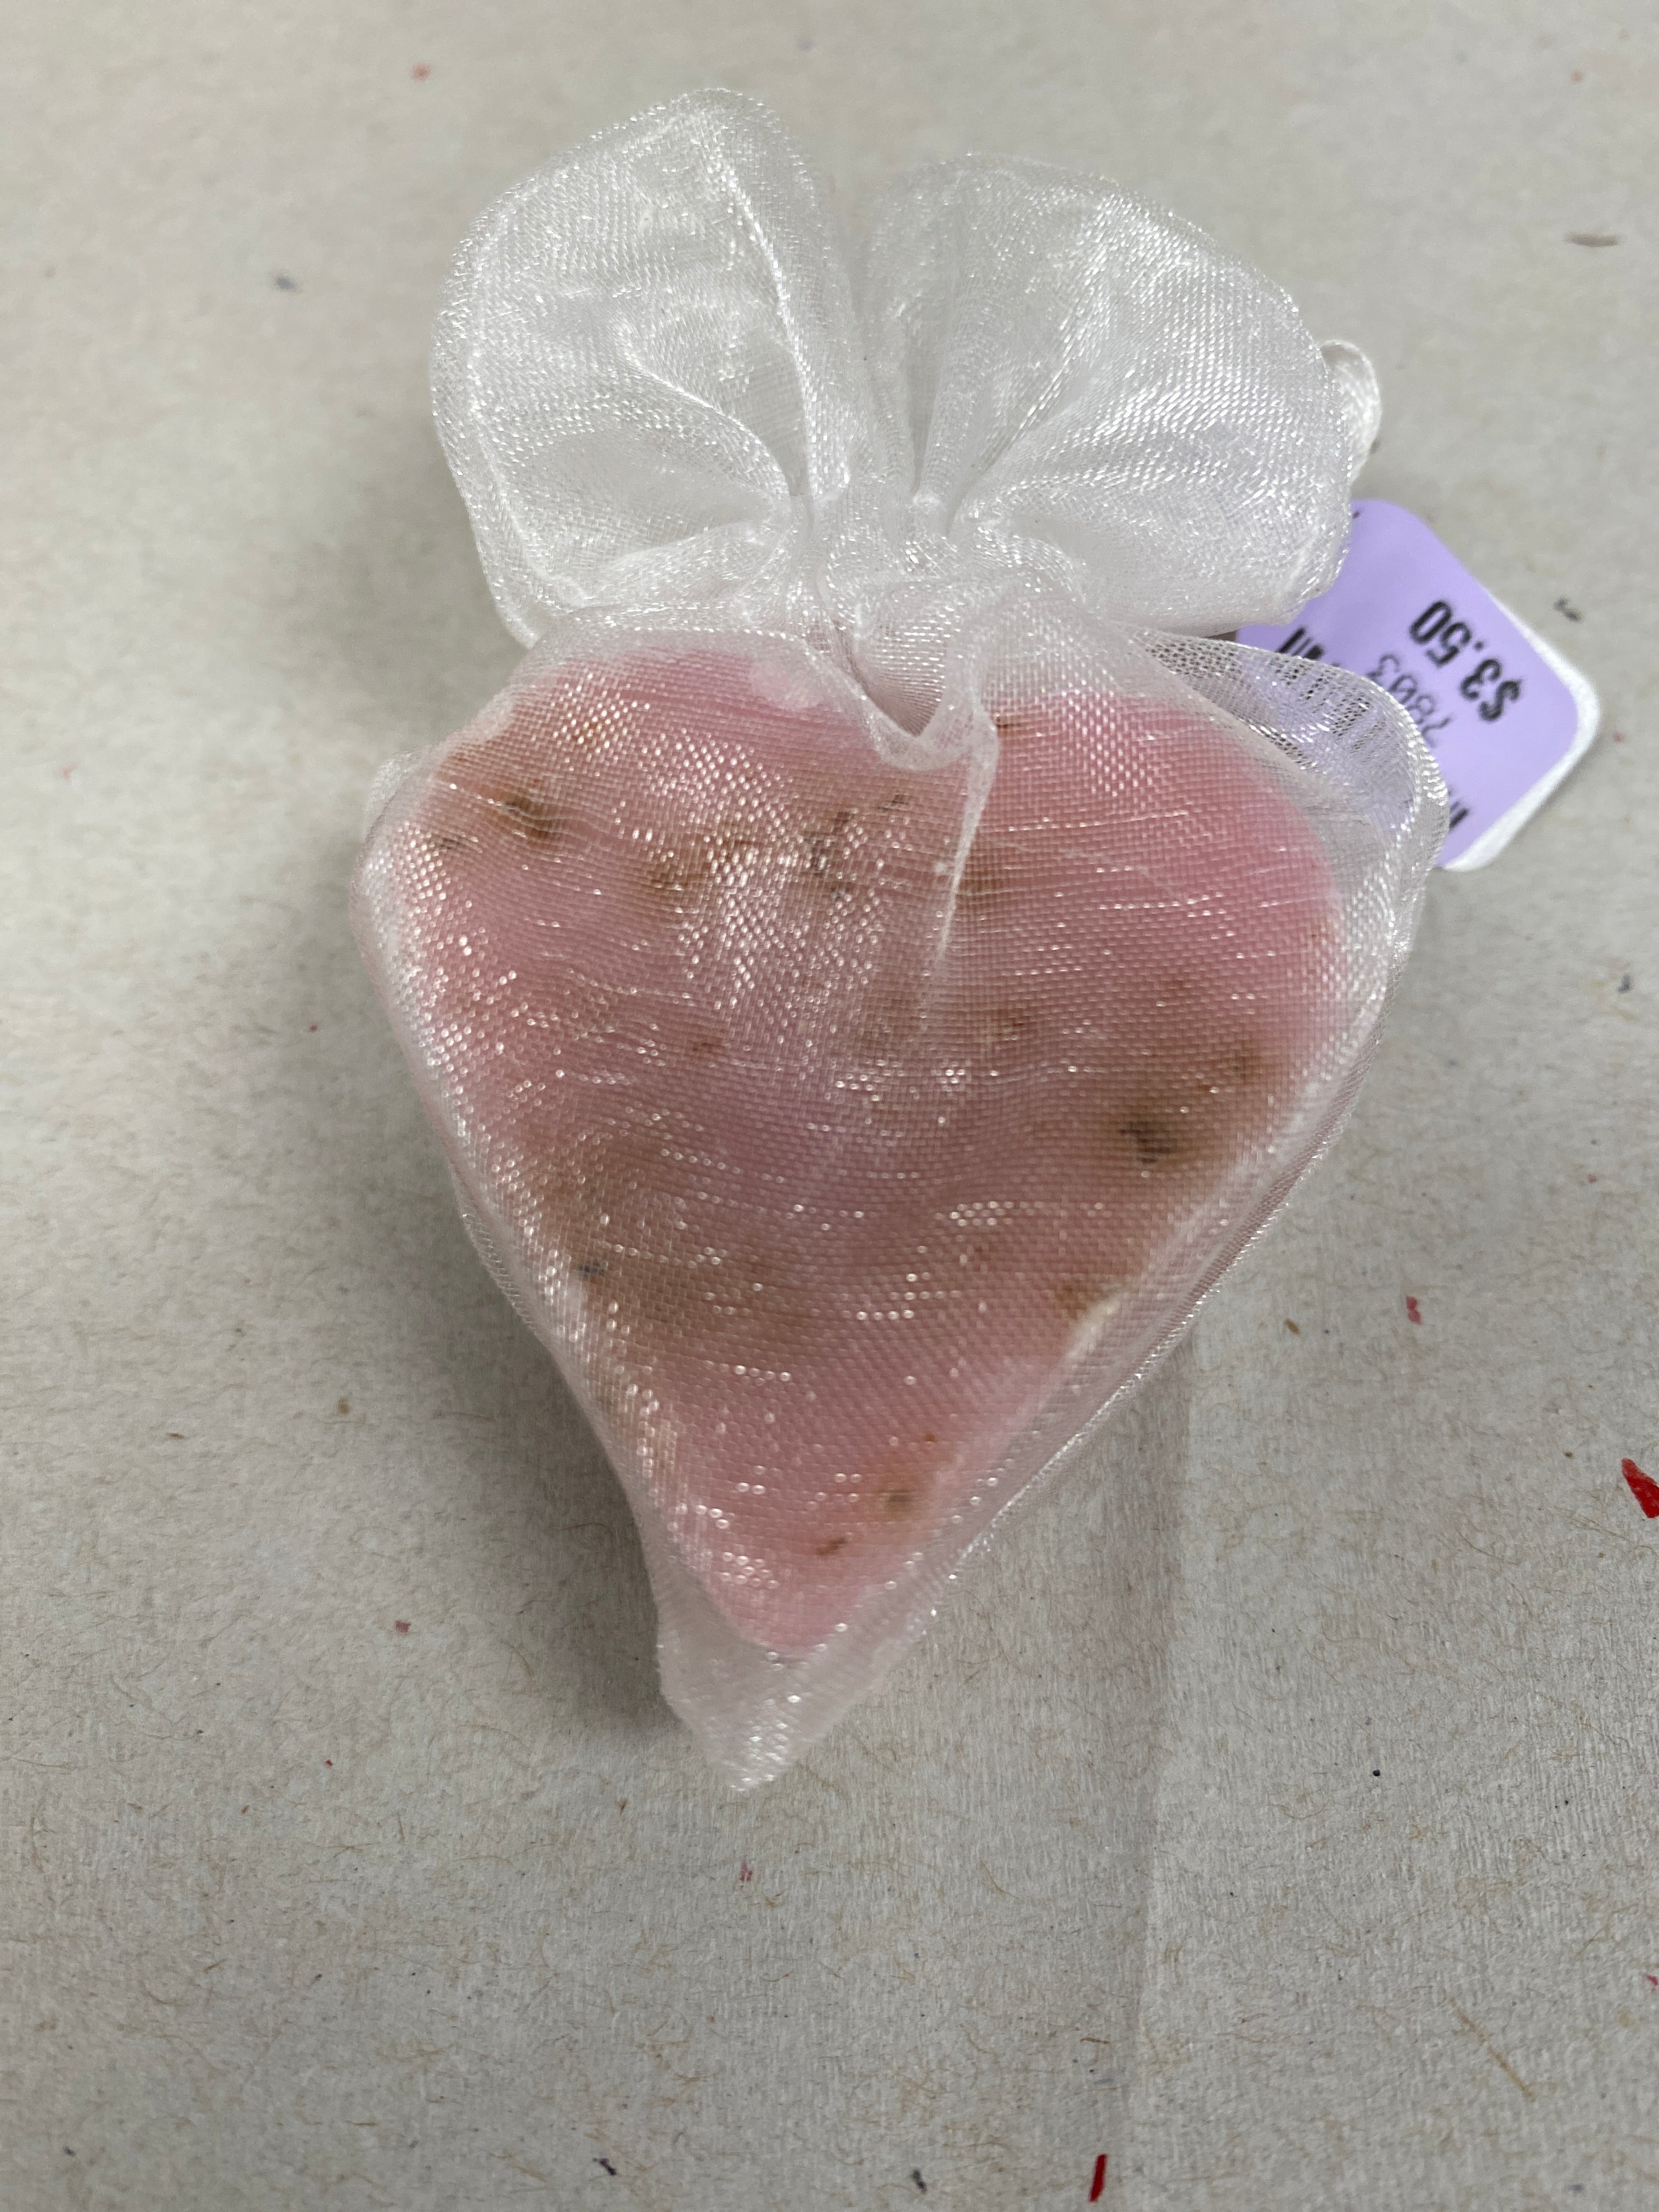 Tiny Rose Exfoliating Heart Soap in Organza Bag